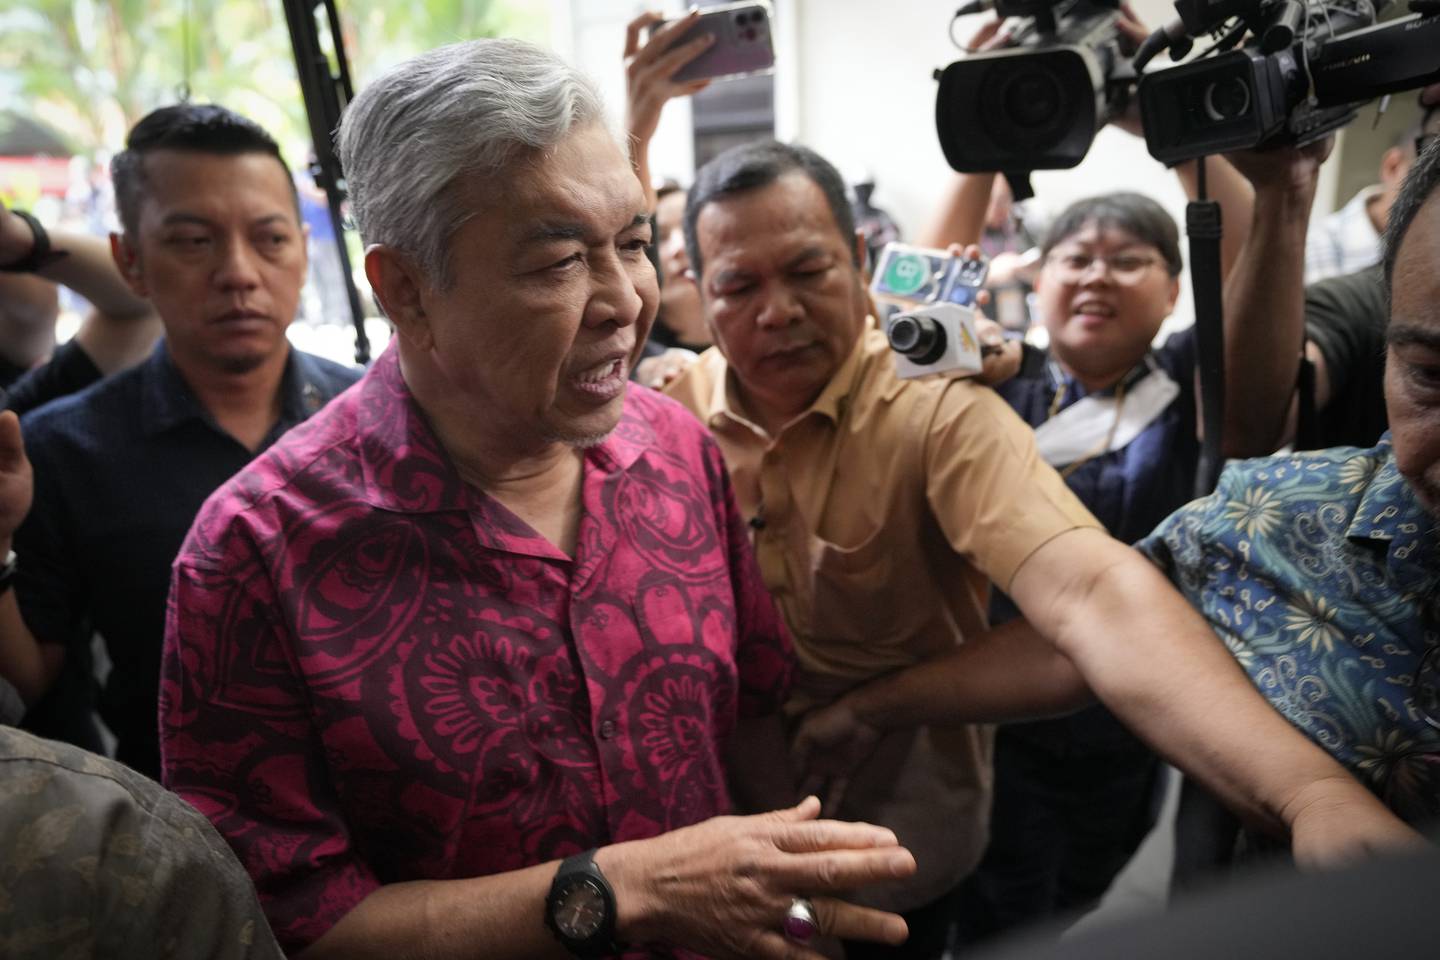 Malaysian Deputy Prime Minister Ahmad Zahid Hamidi, a Malay leader, is reaching out to voters of Chinese heritage. AP Photo